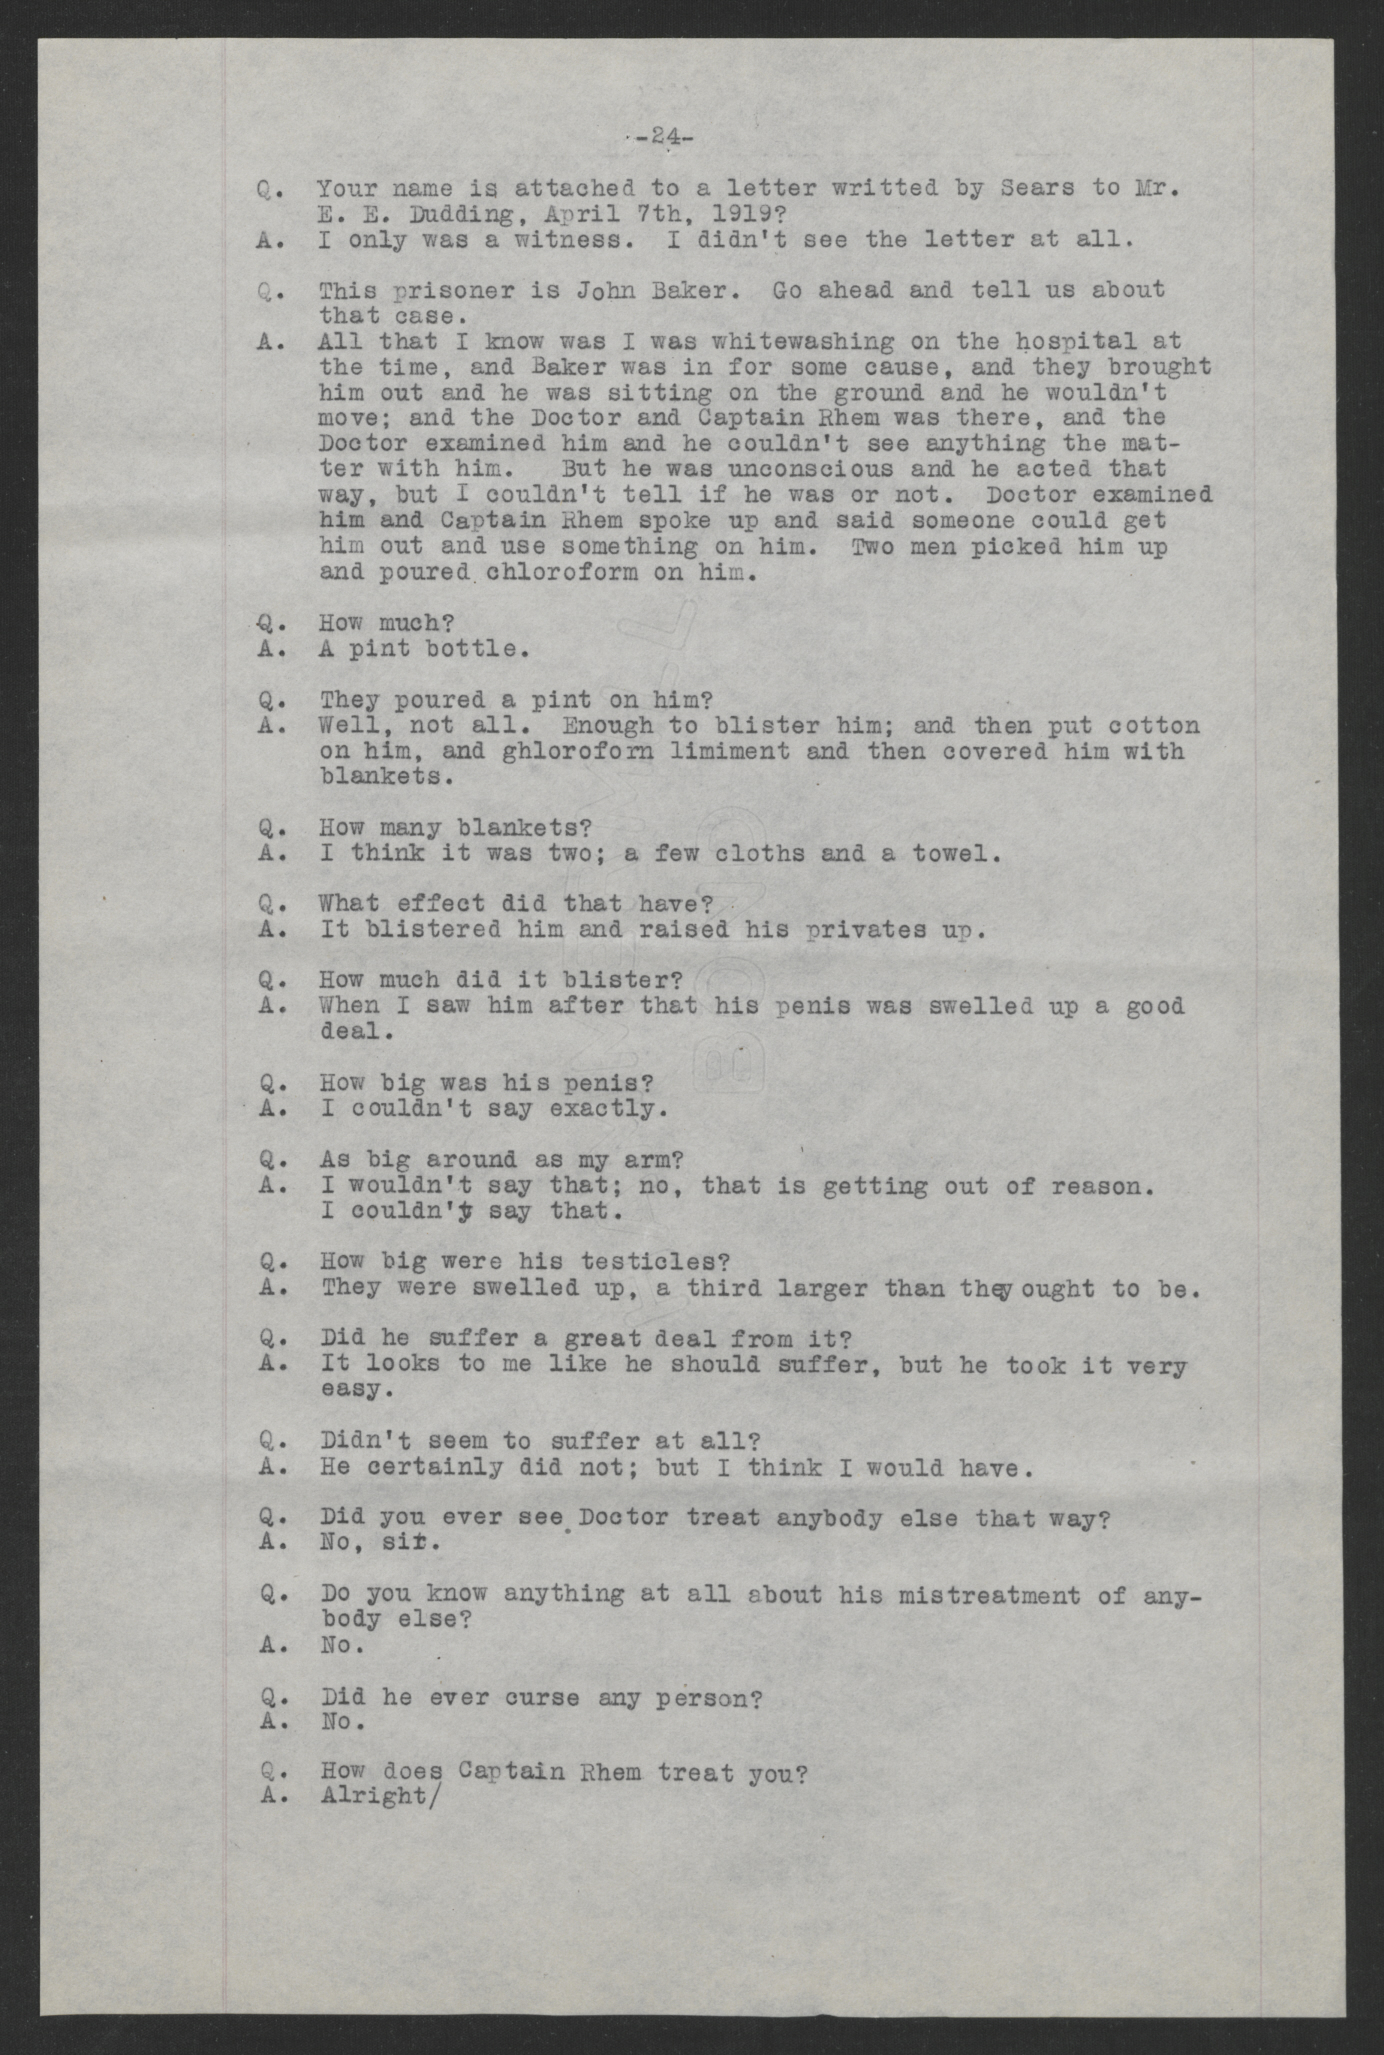 Investigation of the Charges Made by Inmates of the State Prison Farm to Earl E. Dudding, 12 May 1919, page 24